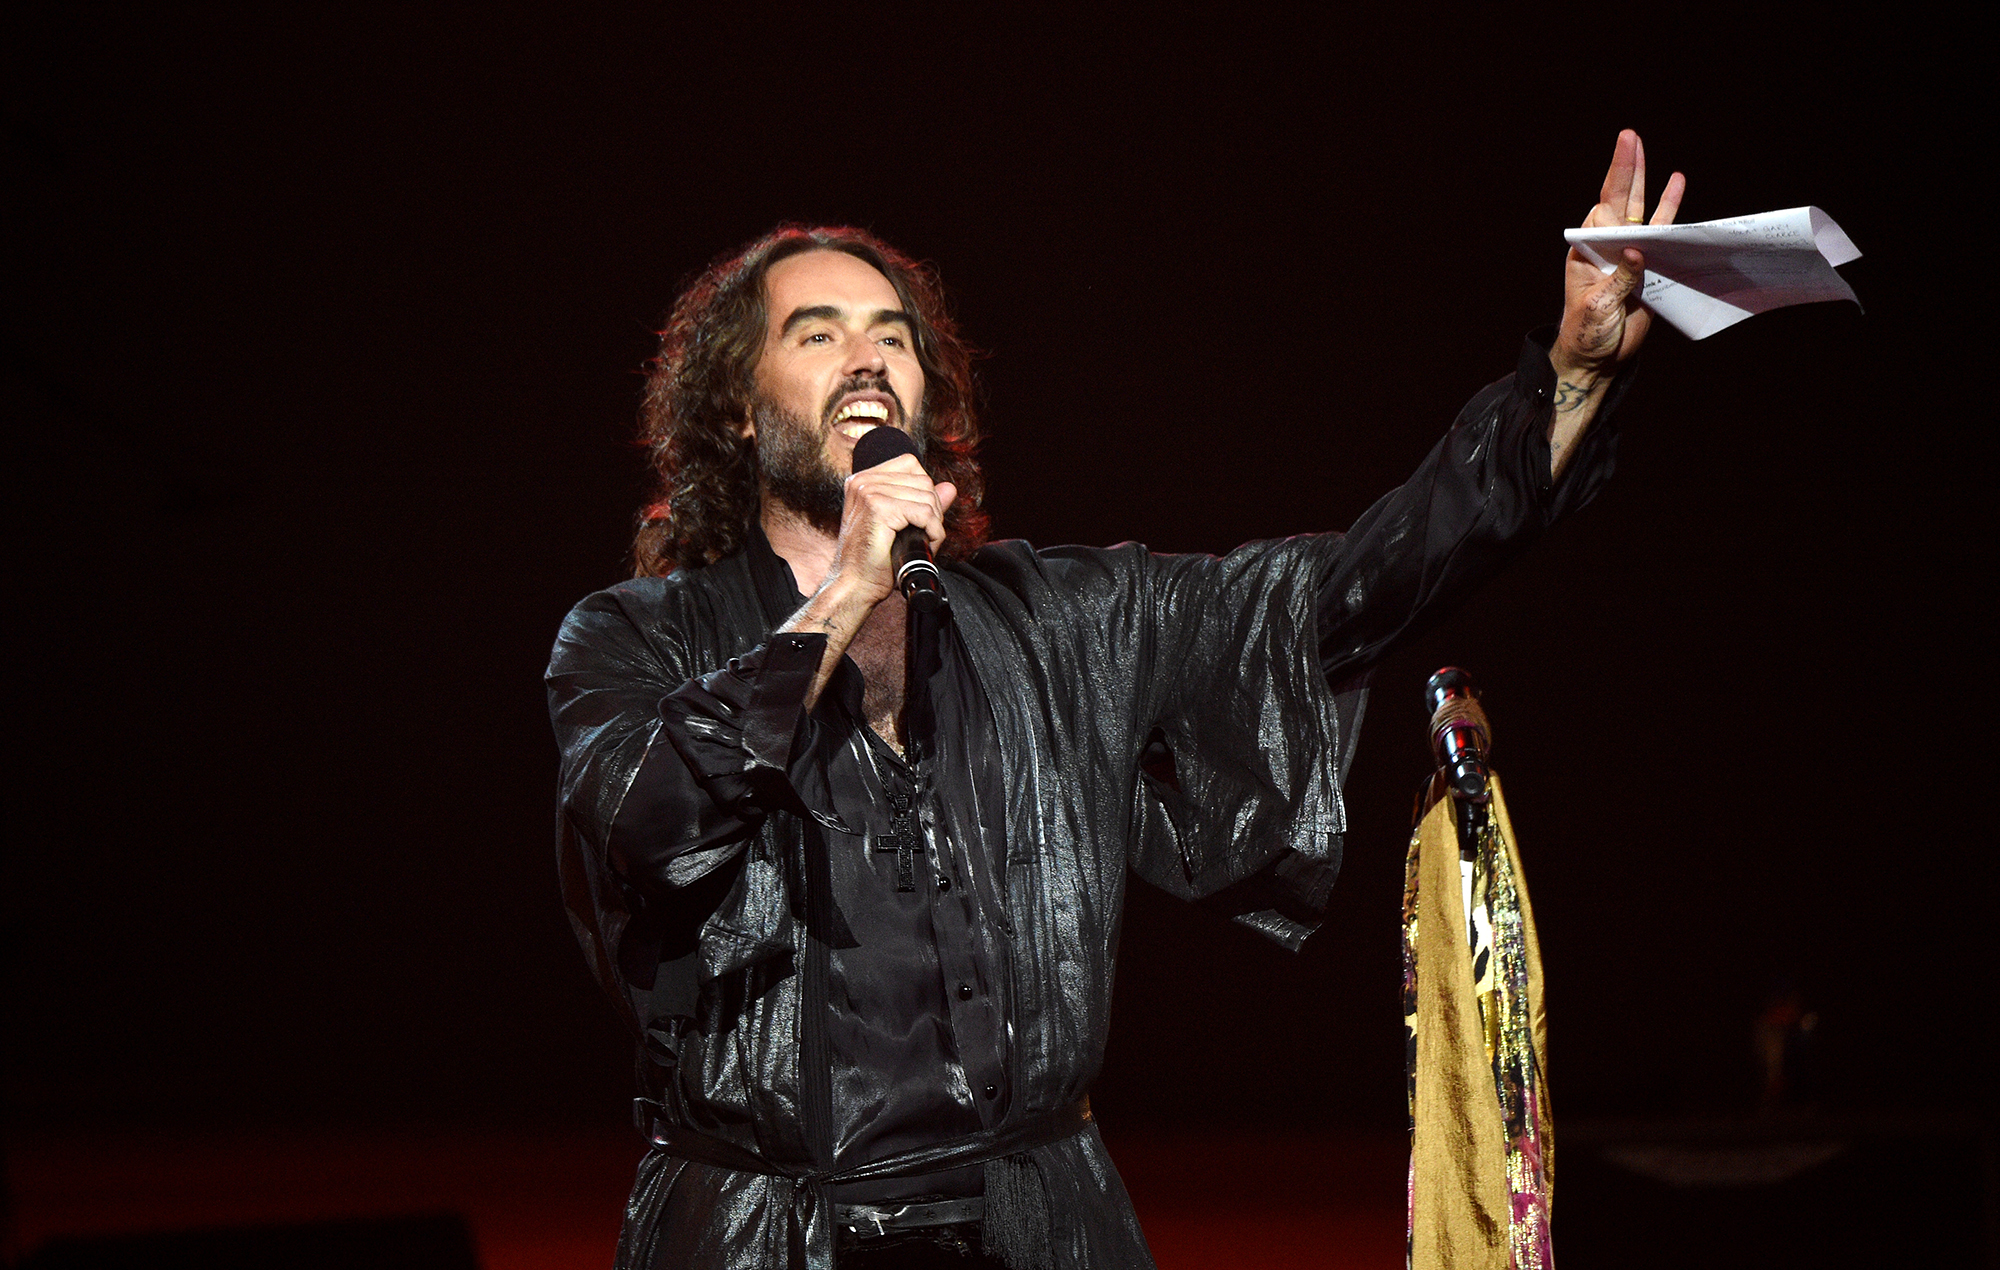 Russell Brand is getting baptised to “leave the past behind”